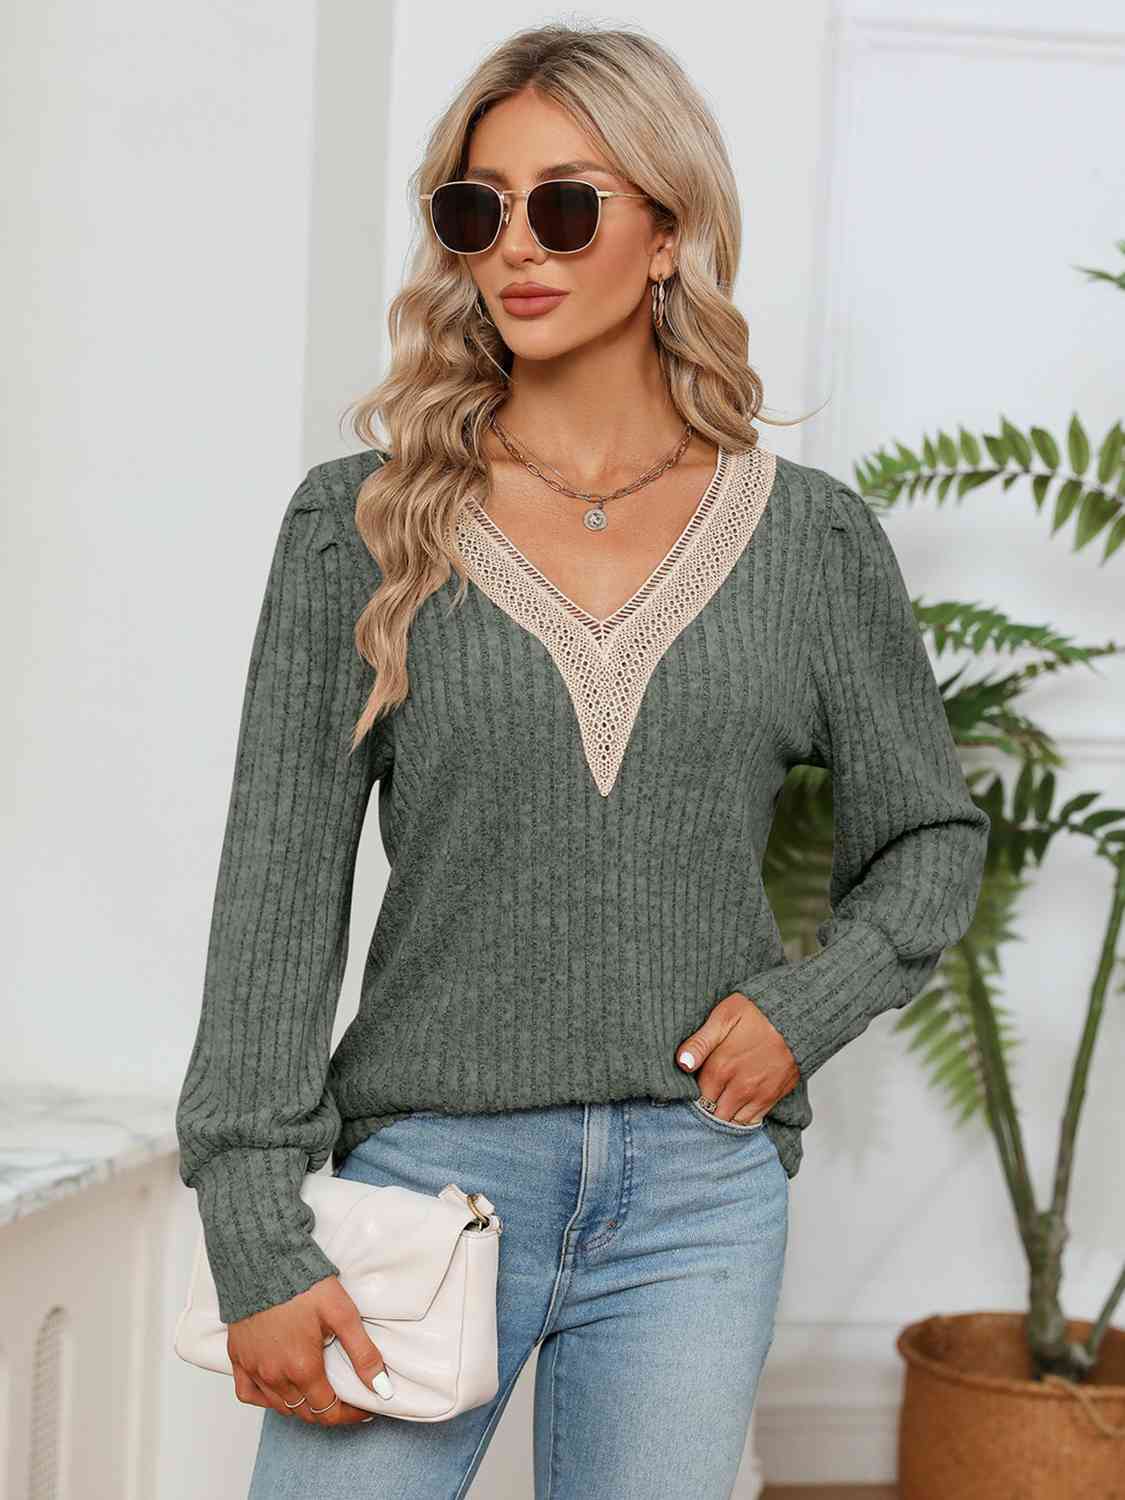 Lace Detail V-Neck Ribbed Blouse - Moss / S - Women’s Clothing & Accessories - Shirts & Tops - 16 - 2024